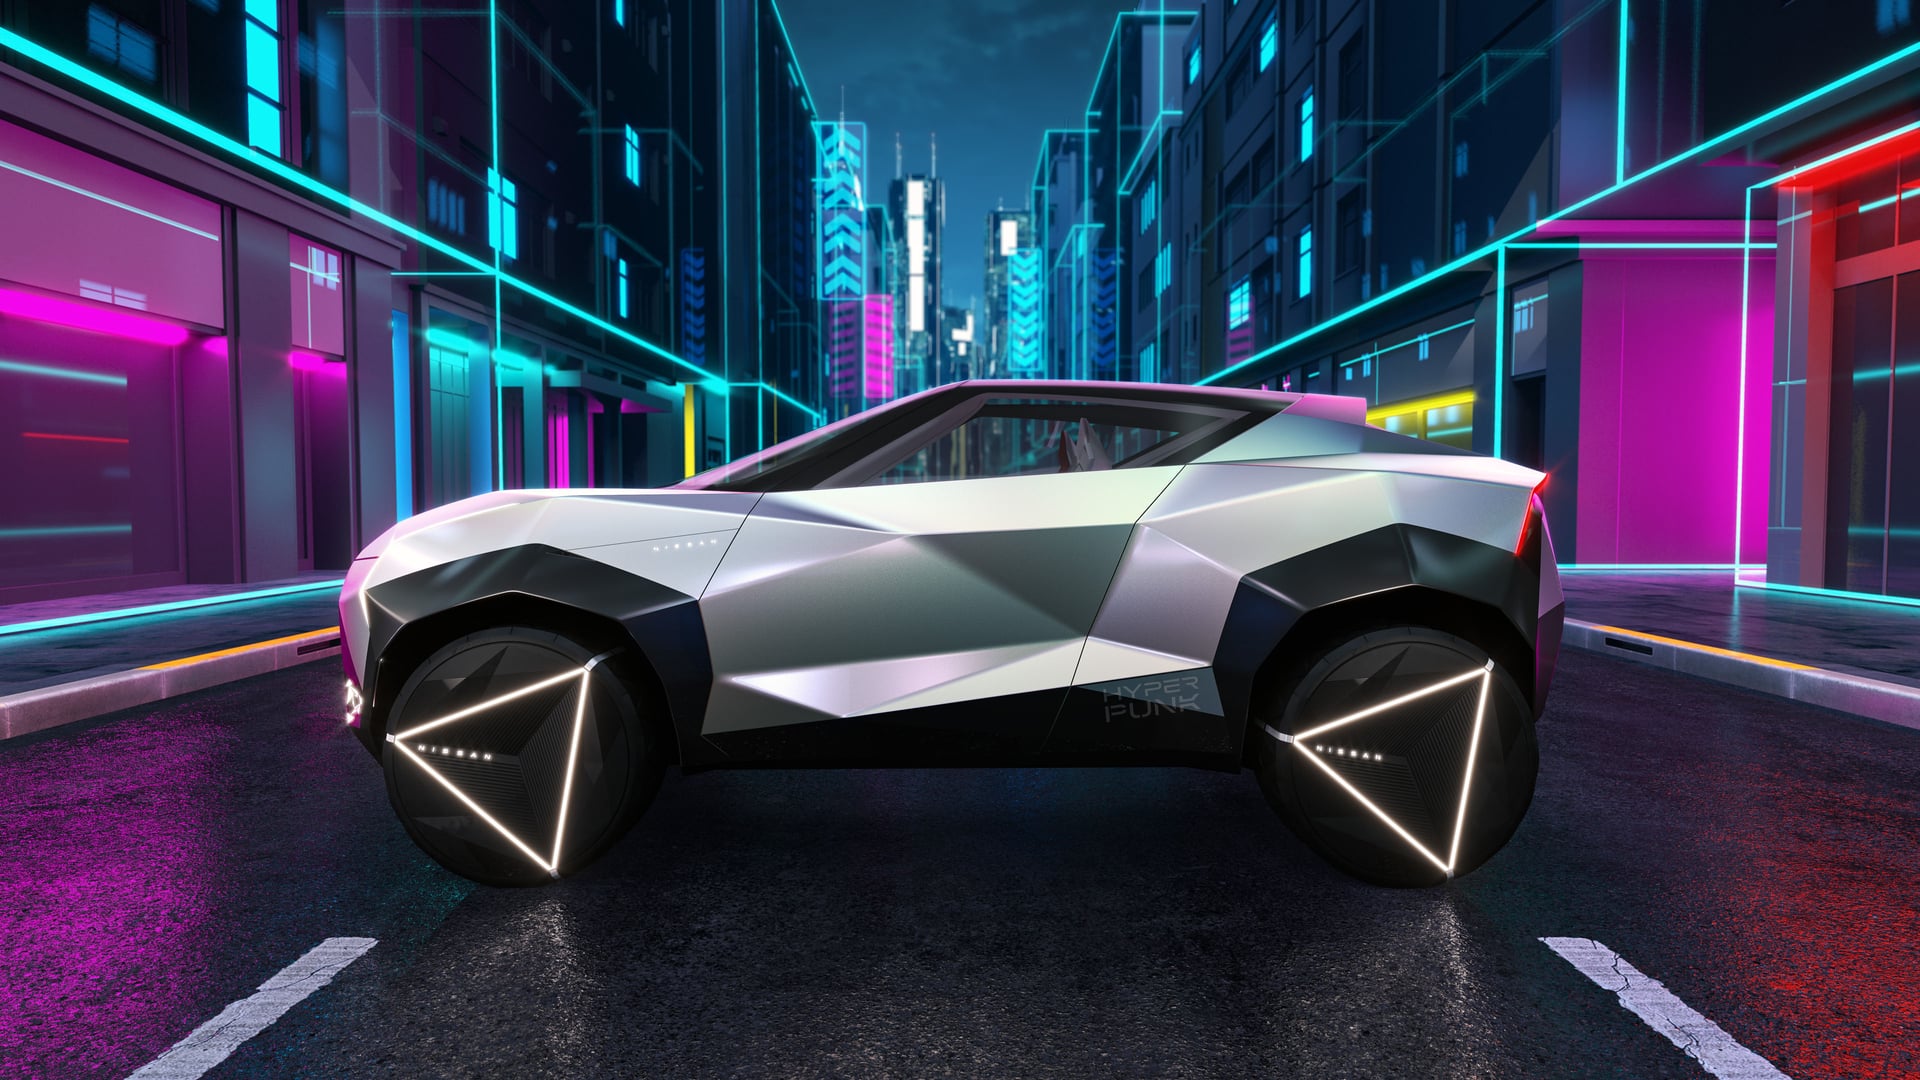 nissan, nismo, tan chong, hyper punk, tokyo mobility, nissan, ev, electric vehicles, nismo, nissan reveals the hyper punk, a new (concept) crossover